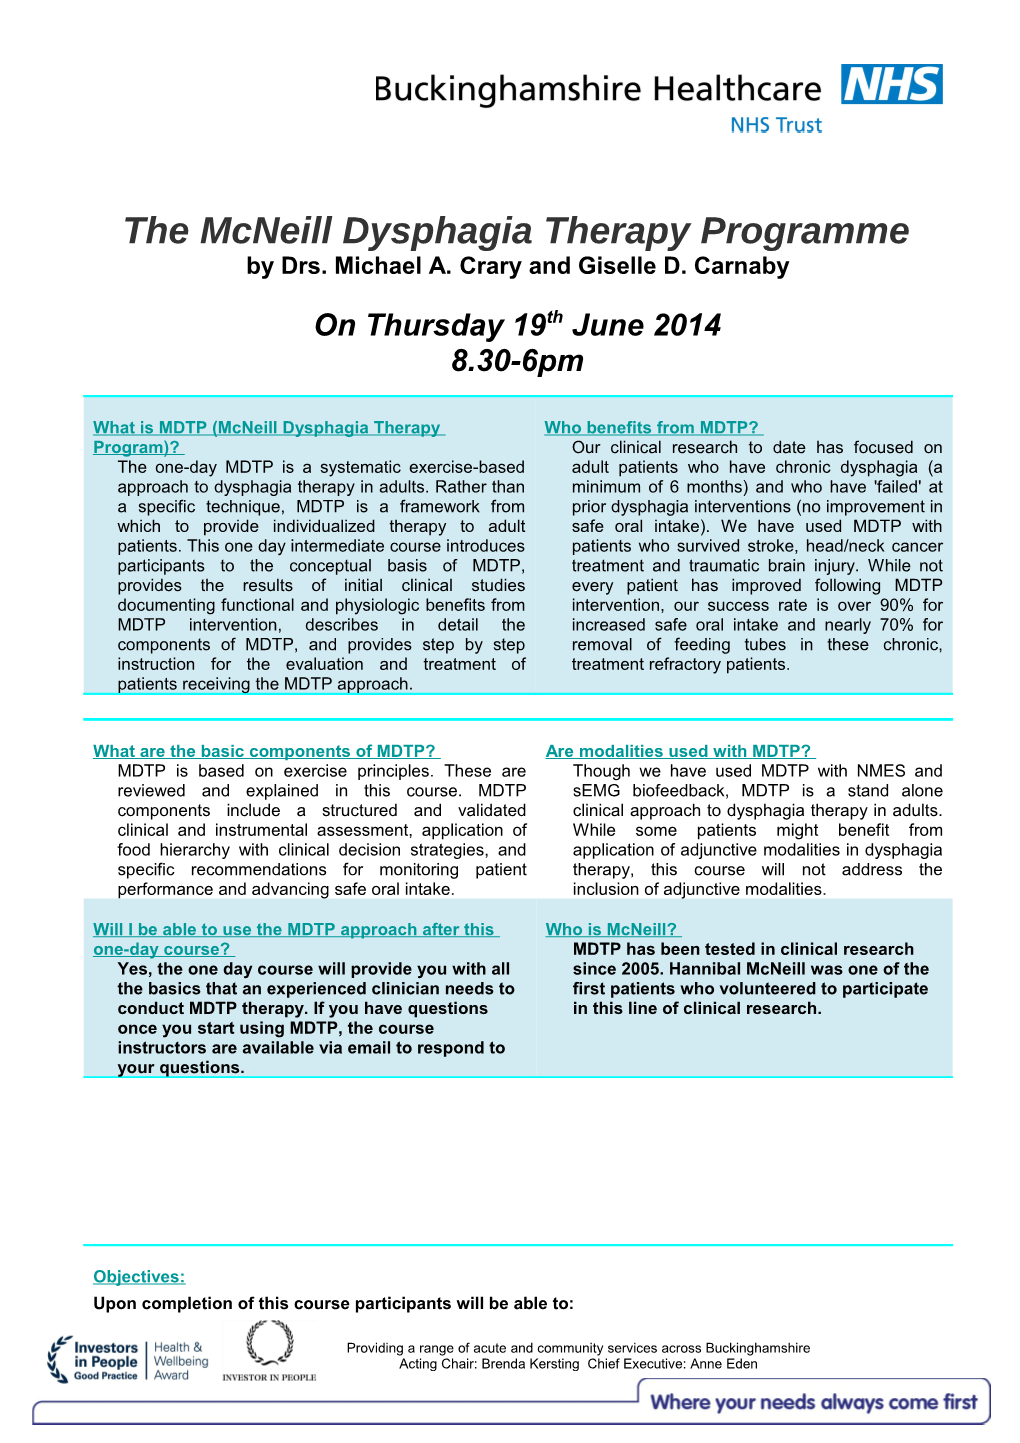 The Mcneill Dysphagia Therapy Programme